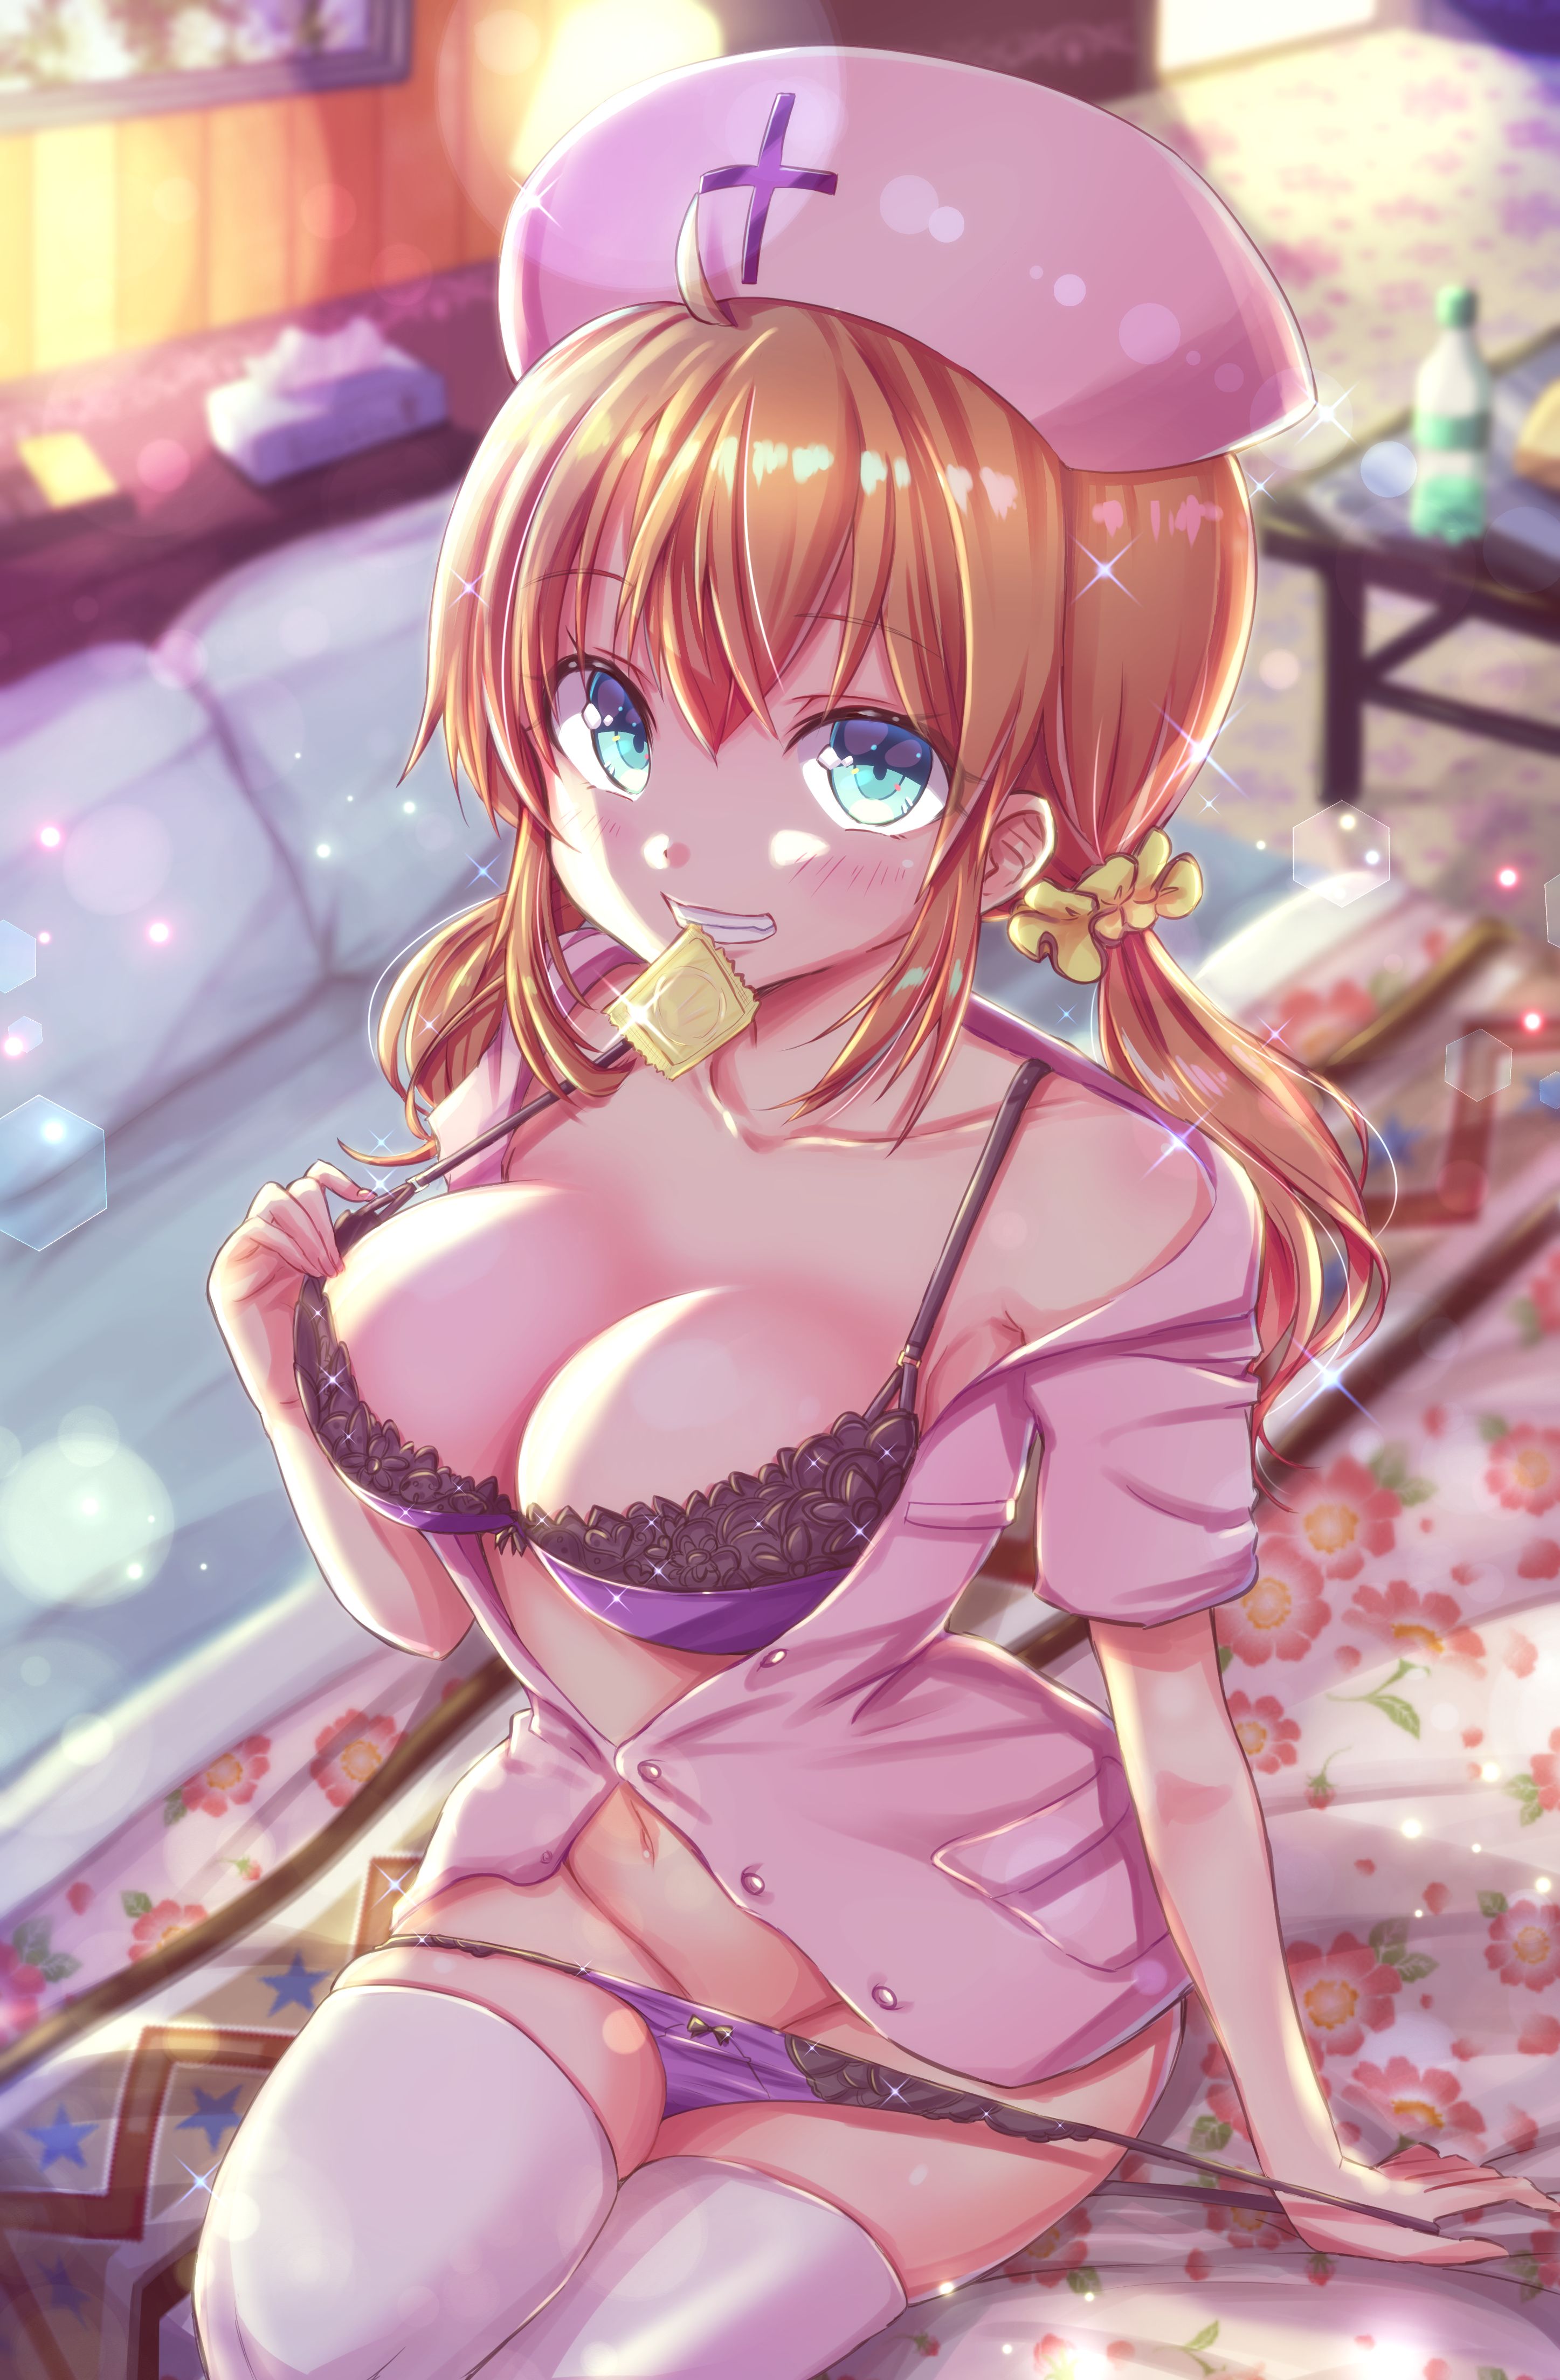 Erotic anime summary erotic image collection of beautiful girls and beautiful girls who are excellent compatibility with condoms [50 sheets] 37